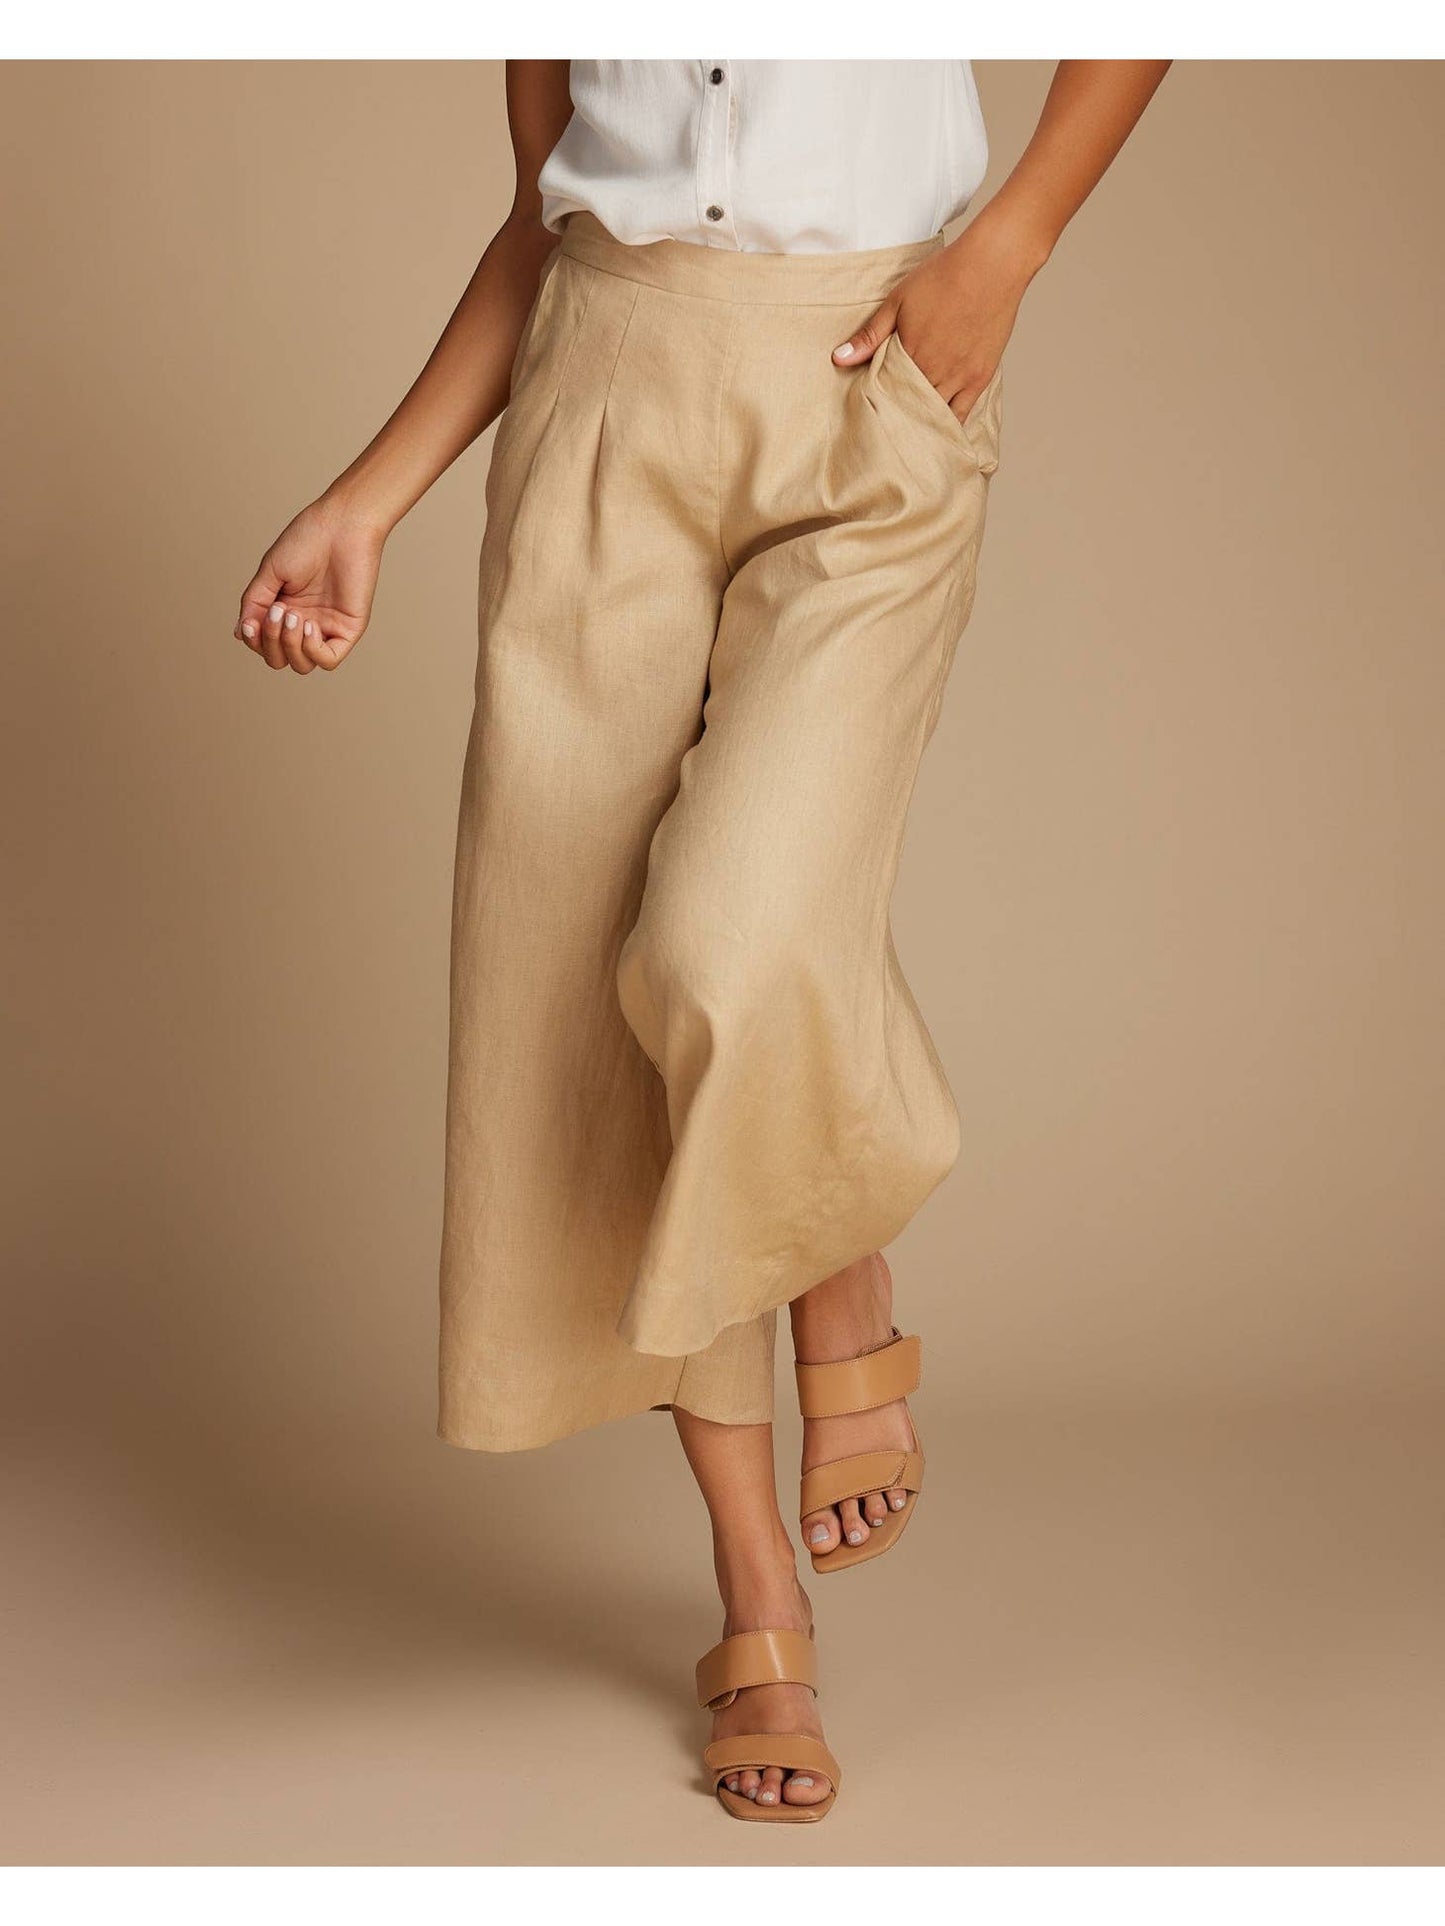 Classy Cove Cropped Pants